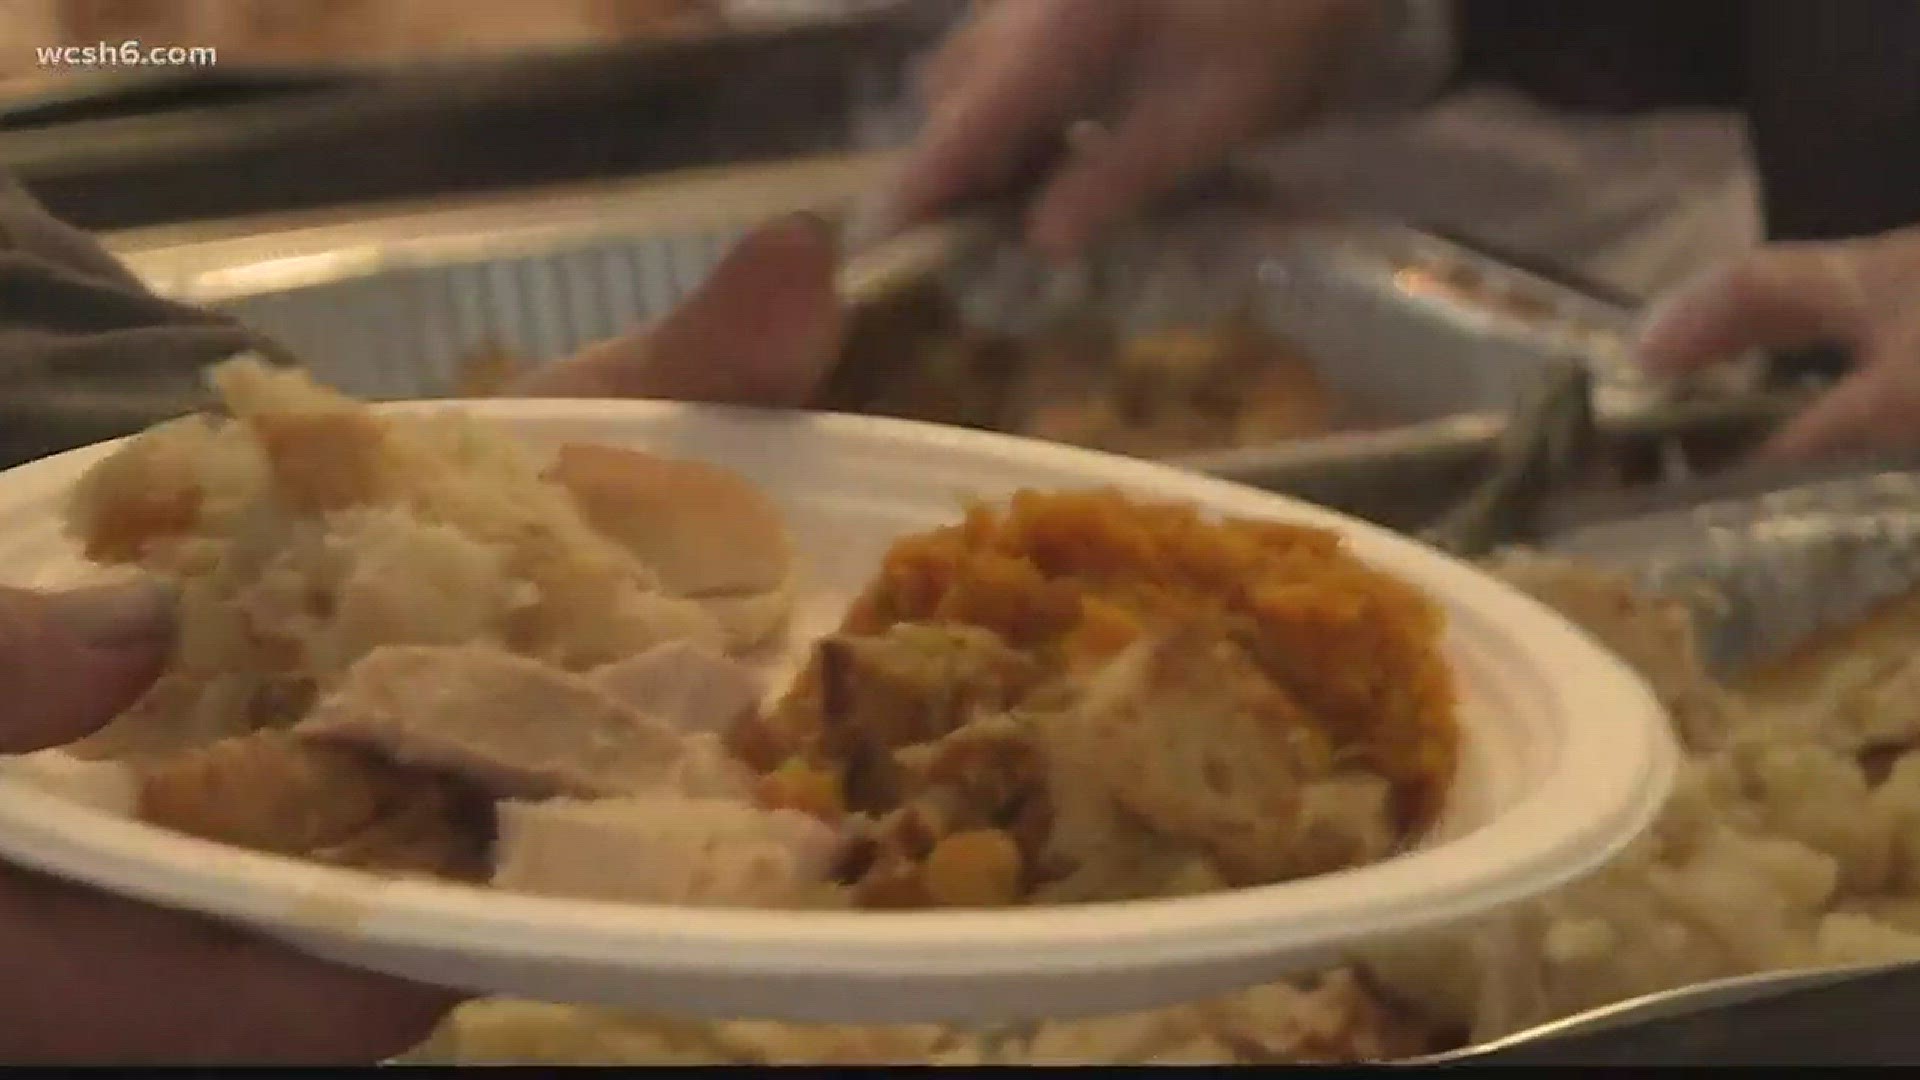 7th Annual Wayside Food Program Thanksgiving Dinner Feeds Over 200 People